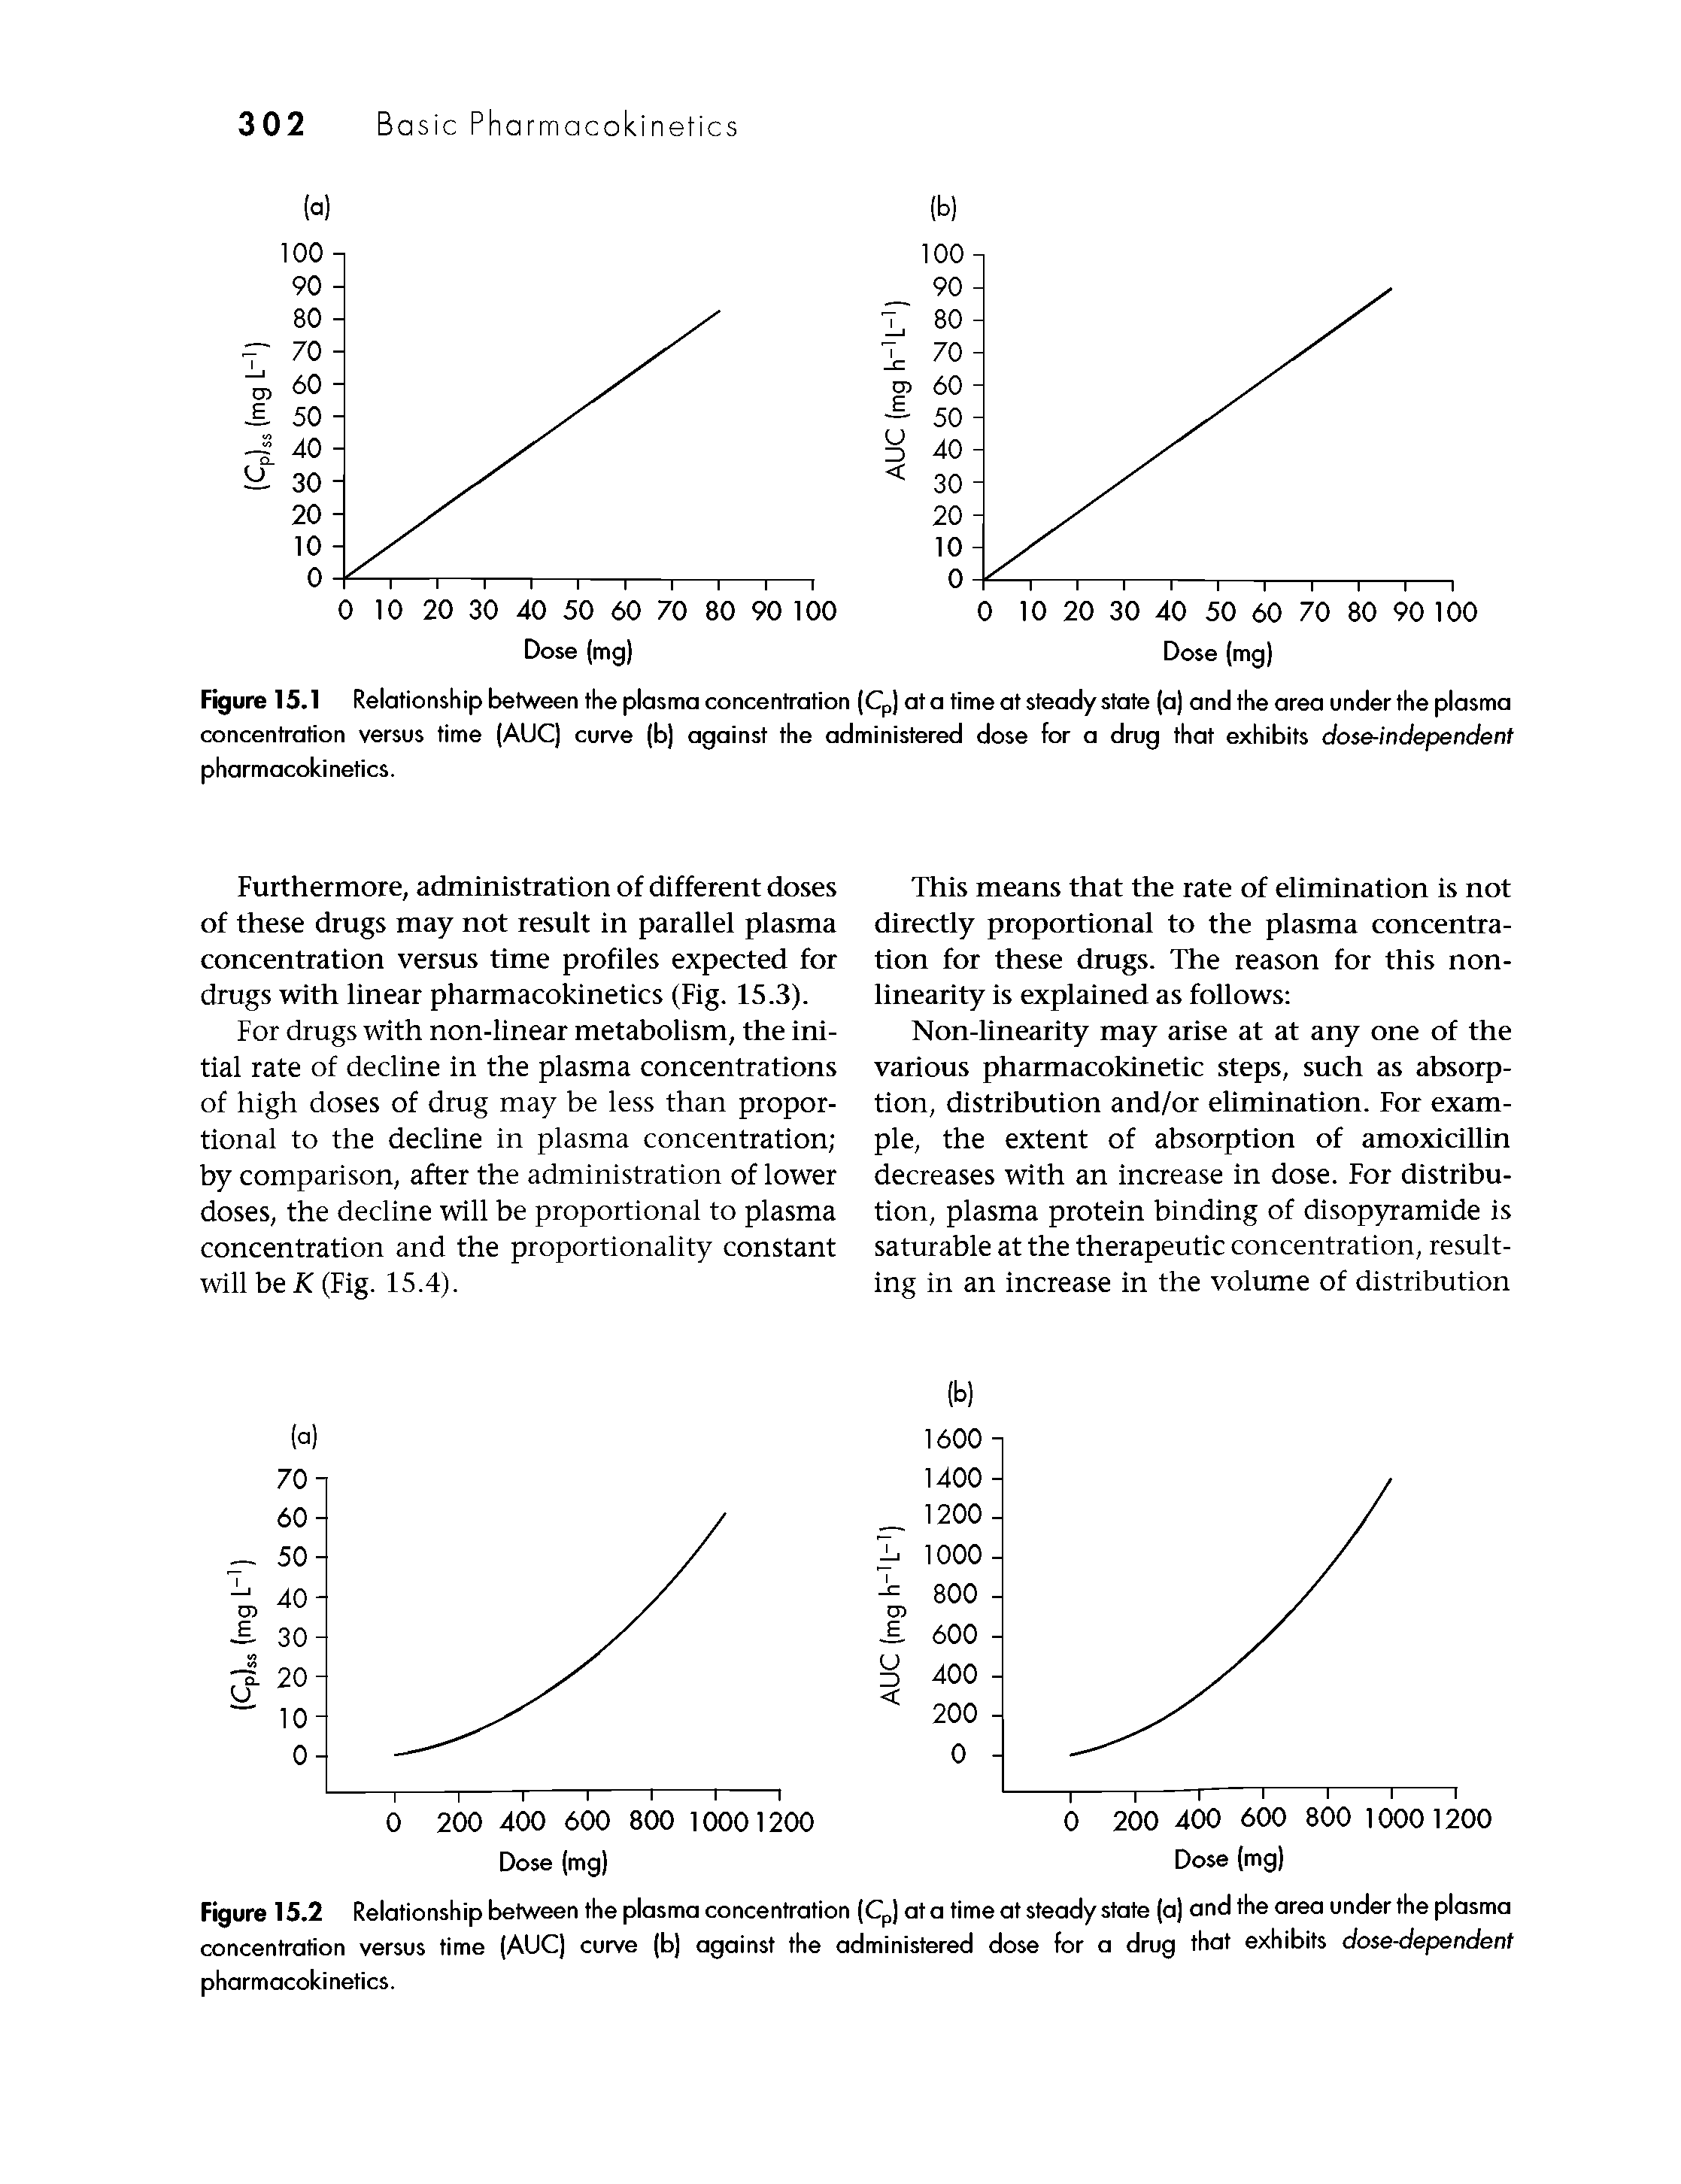 Figure 15.1 Relationship between the plasma concentration (Cp) at a time at steady state (a) and the area under the plasma concentration versus time (ADC) curve (b) against the administered dose for a drug that exhibits dose-independent pharmacokinetics.